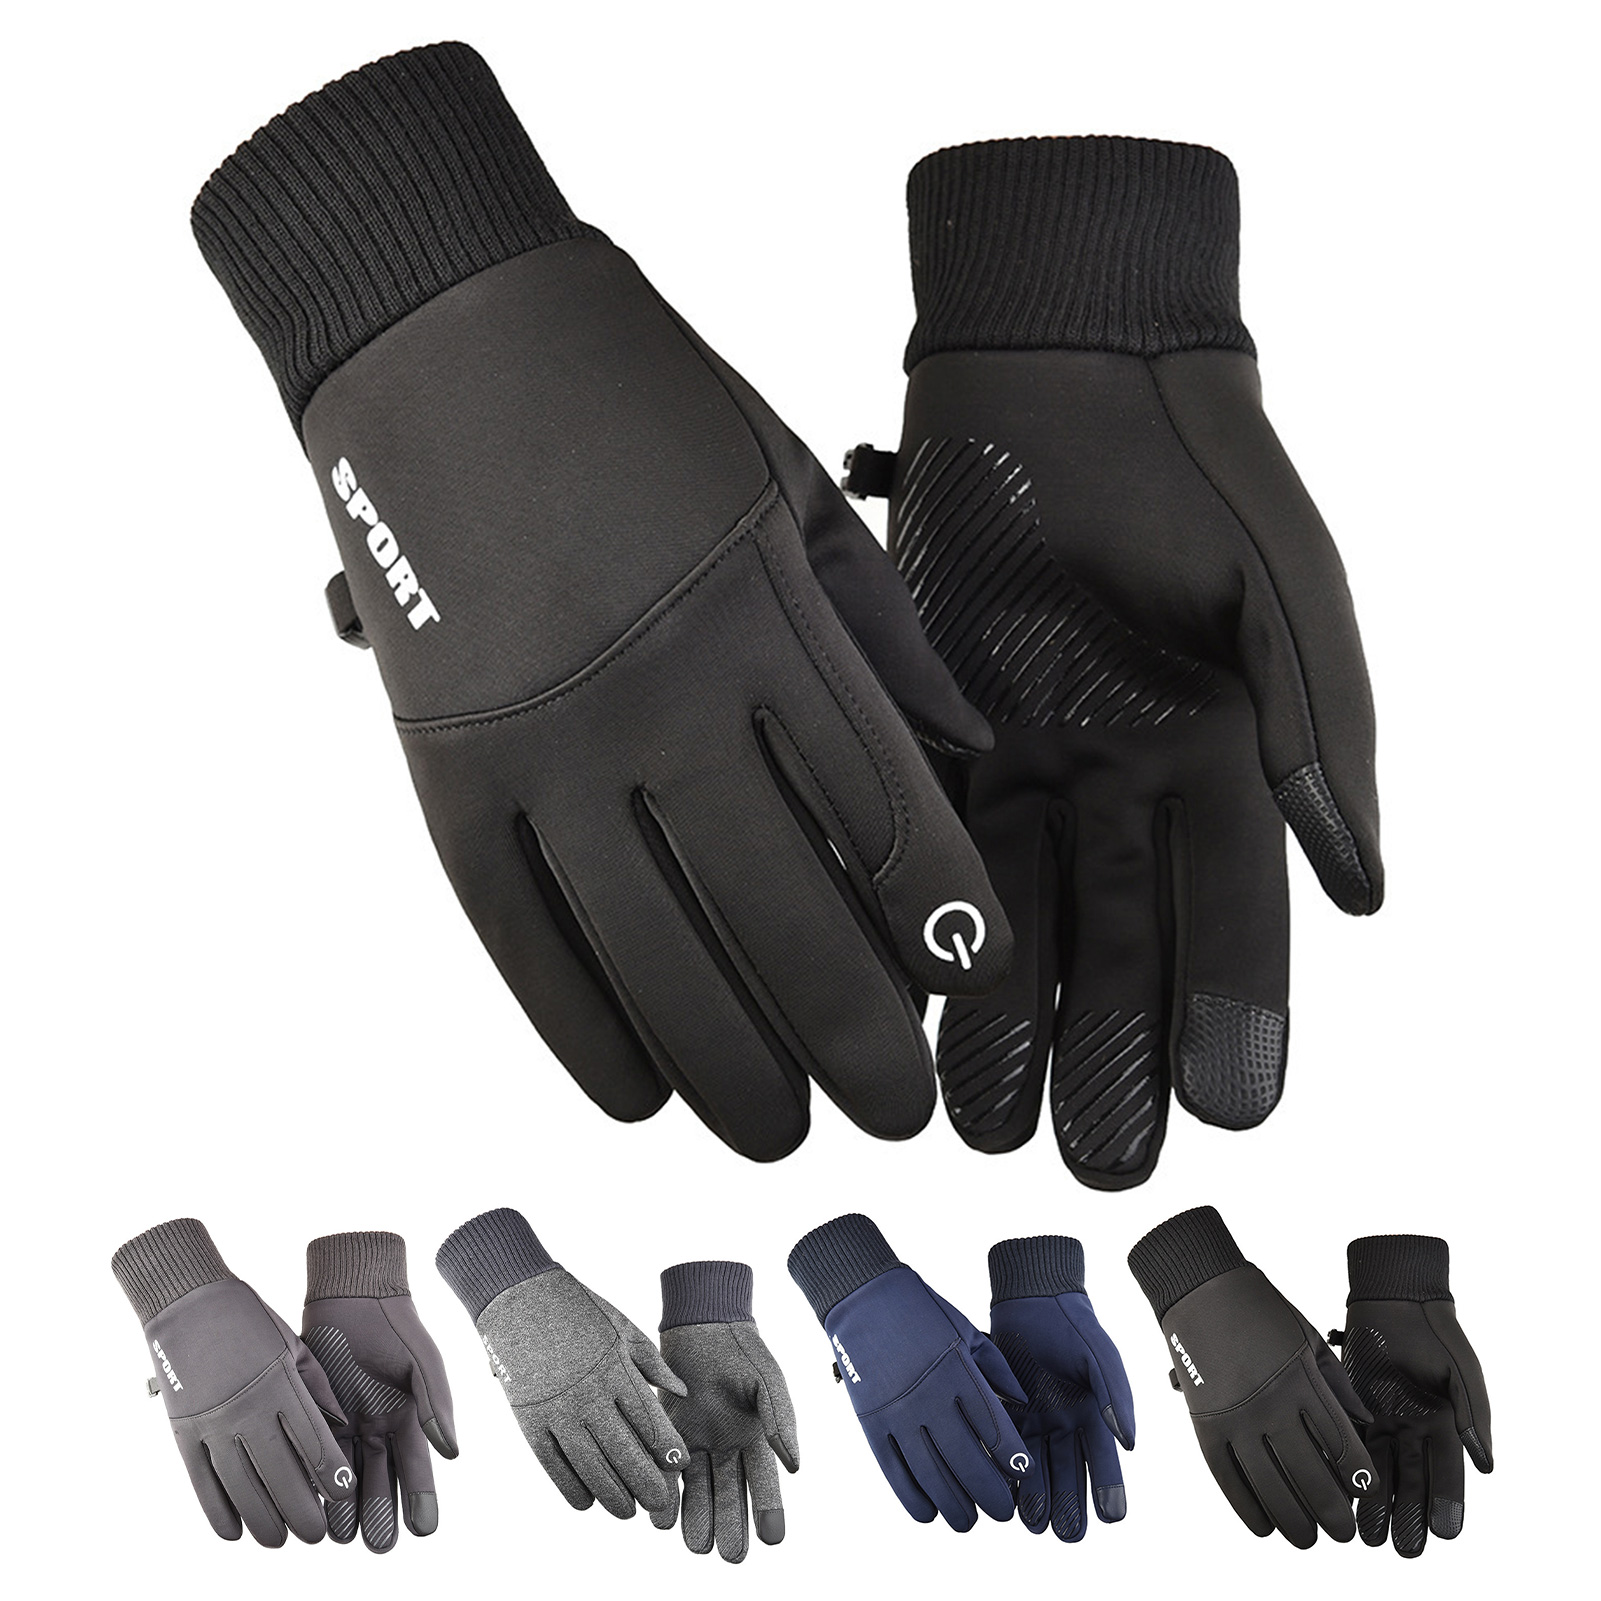 Ralapu Riding Gloves Windproof Riding Gloves Men s Windproof Winter